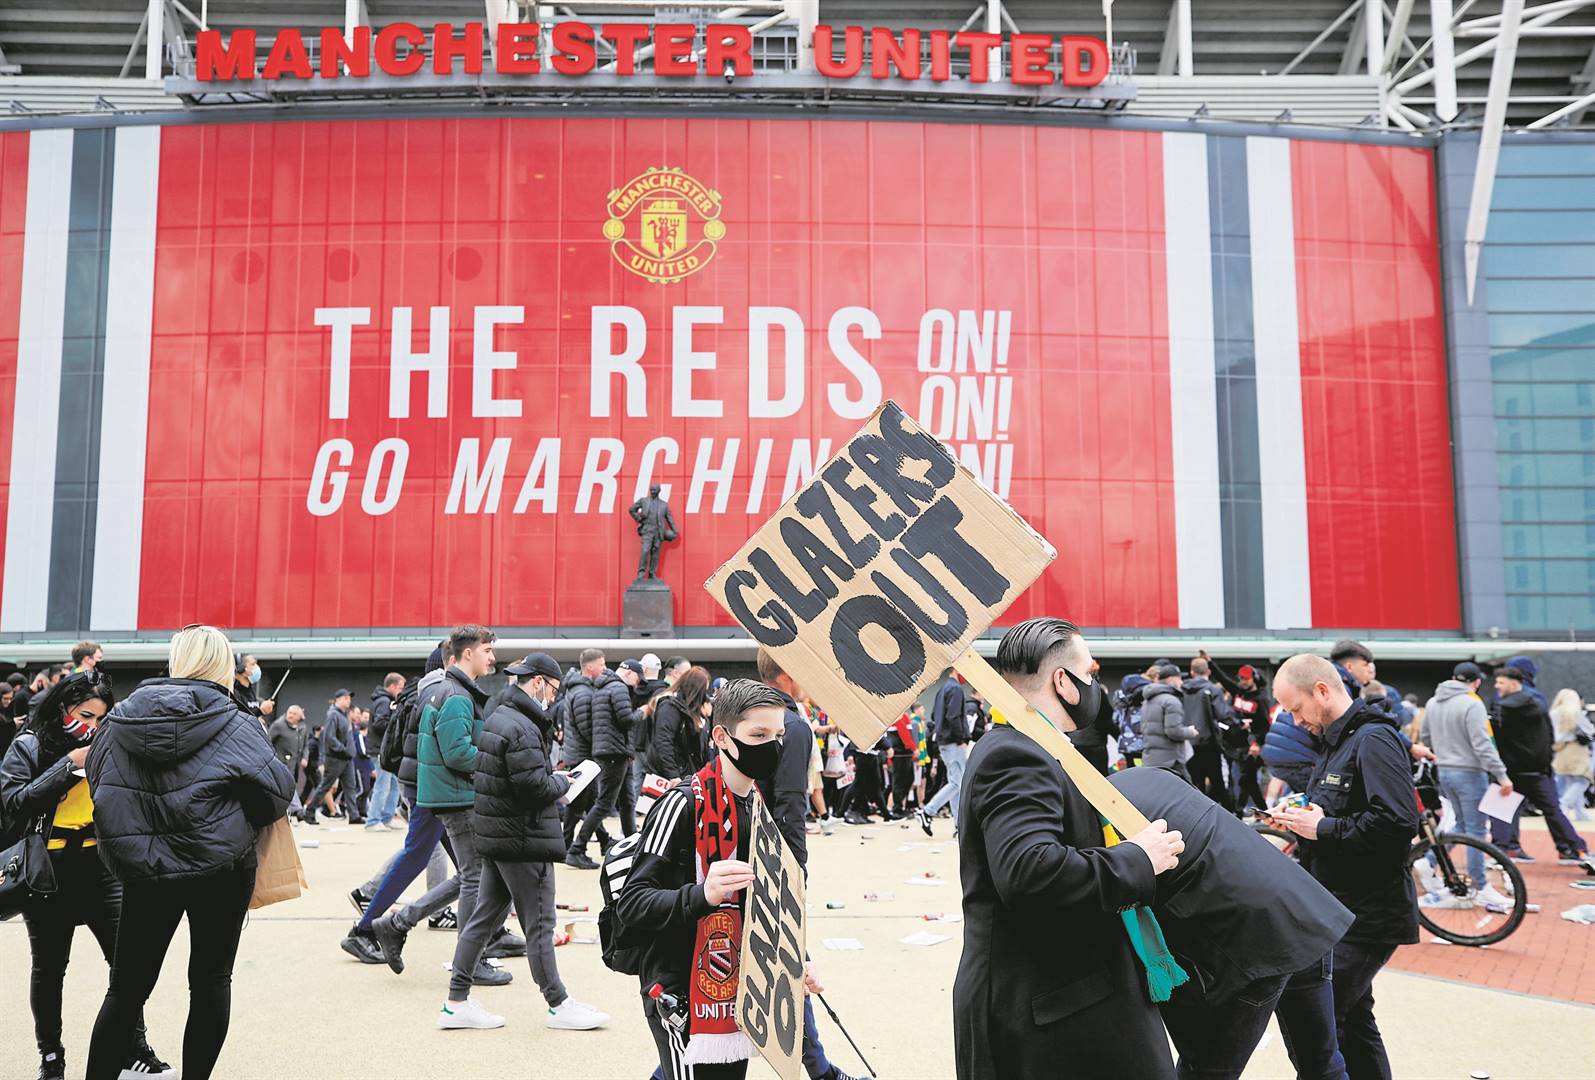 Manchester United fans protest against their owners before the Manchester United versus Liverpool Premier League match on Sunday. PHOTO: reuters